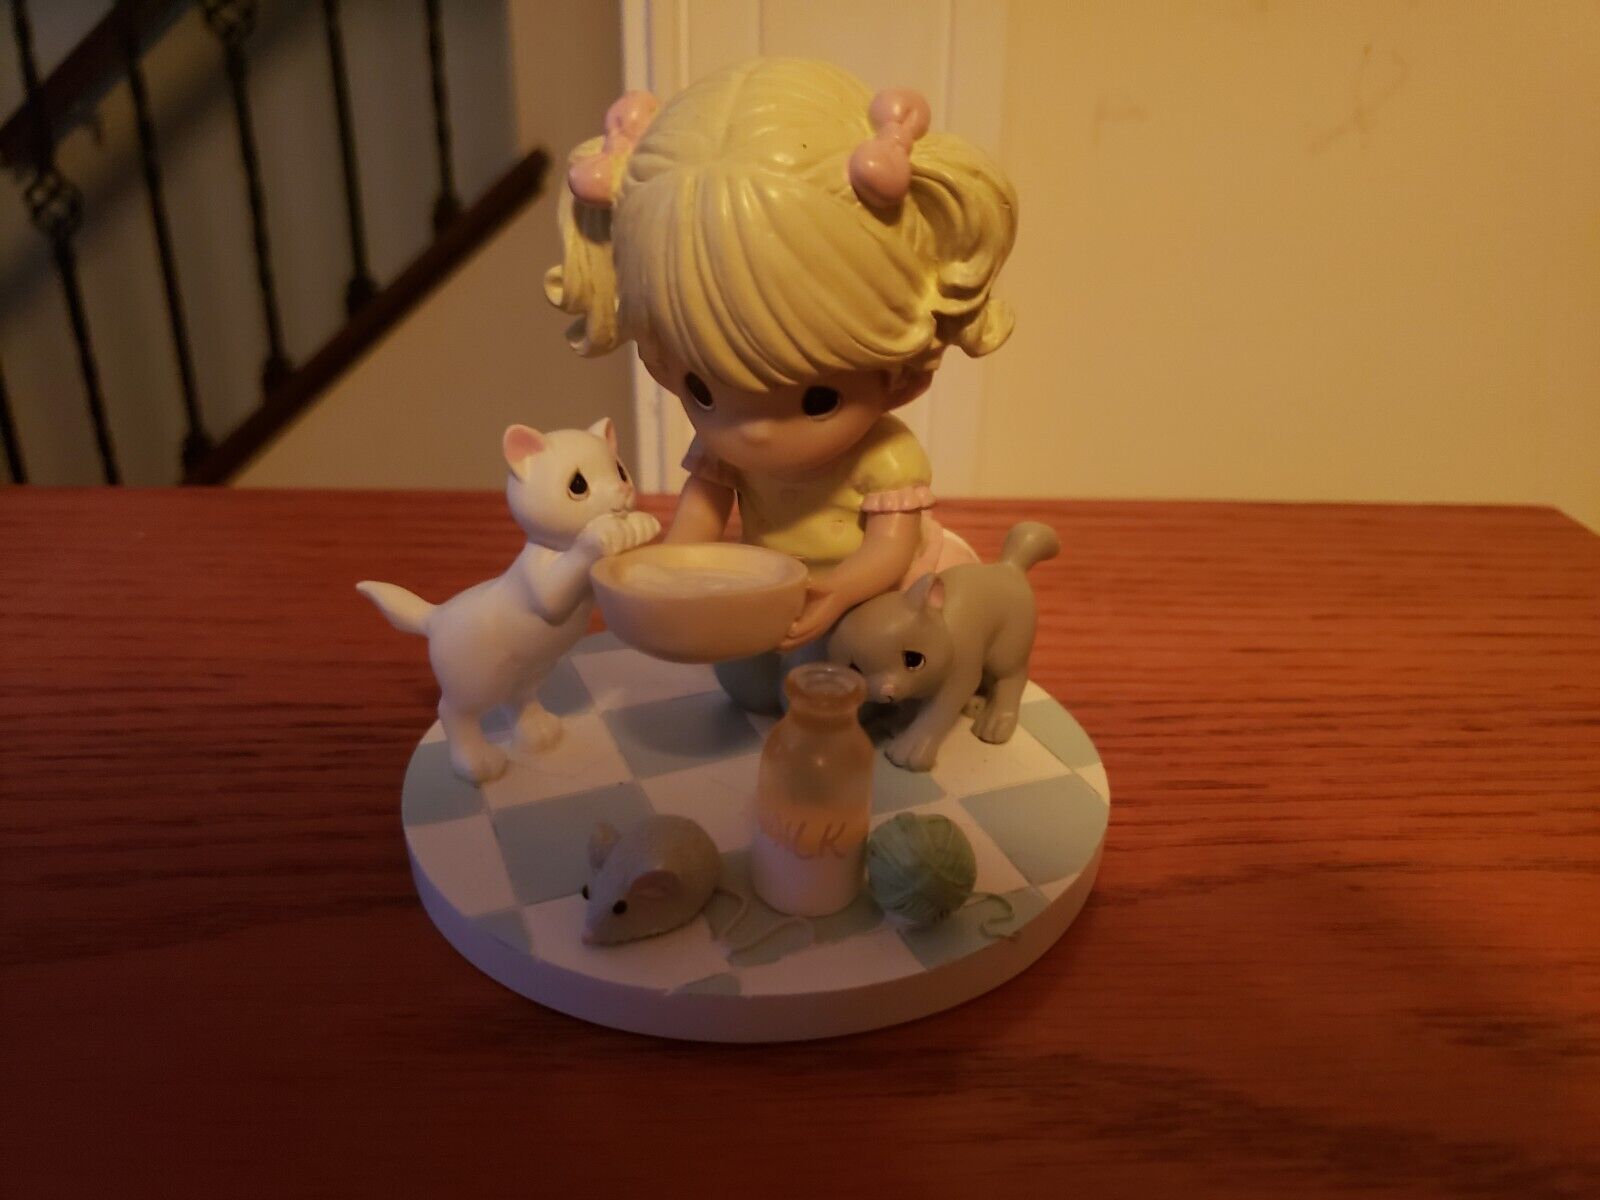 2010 Enesco My Heart is Covered in Paw Prints Precious Moments Figurine Ltd Ed